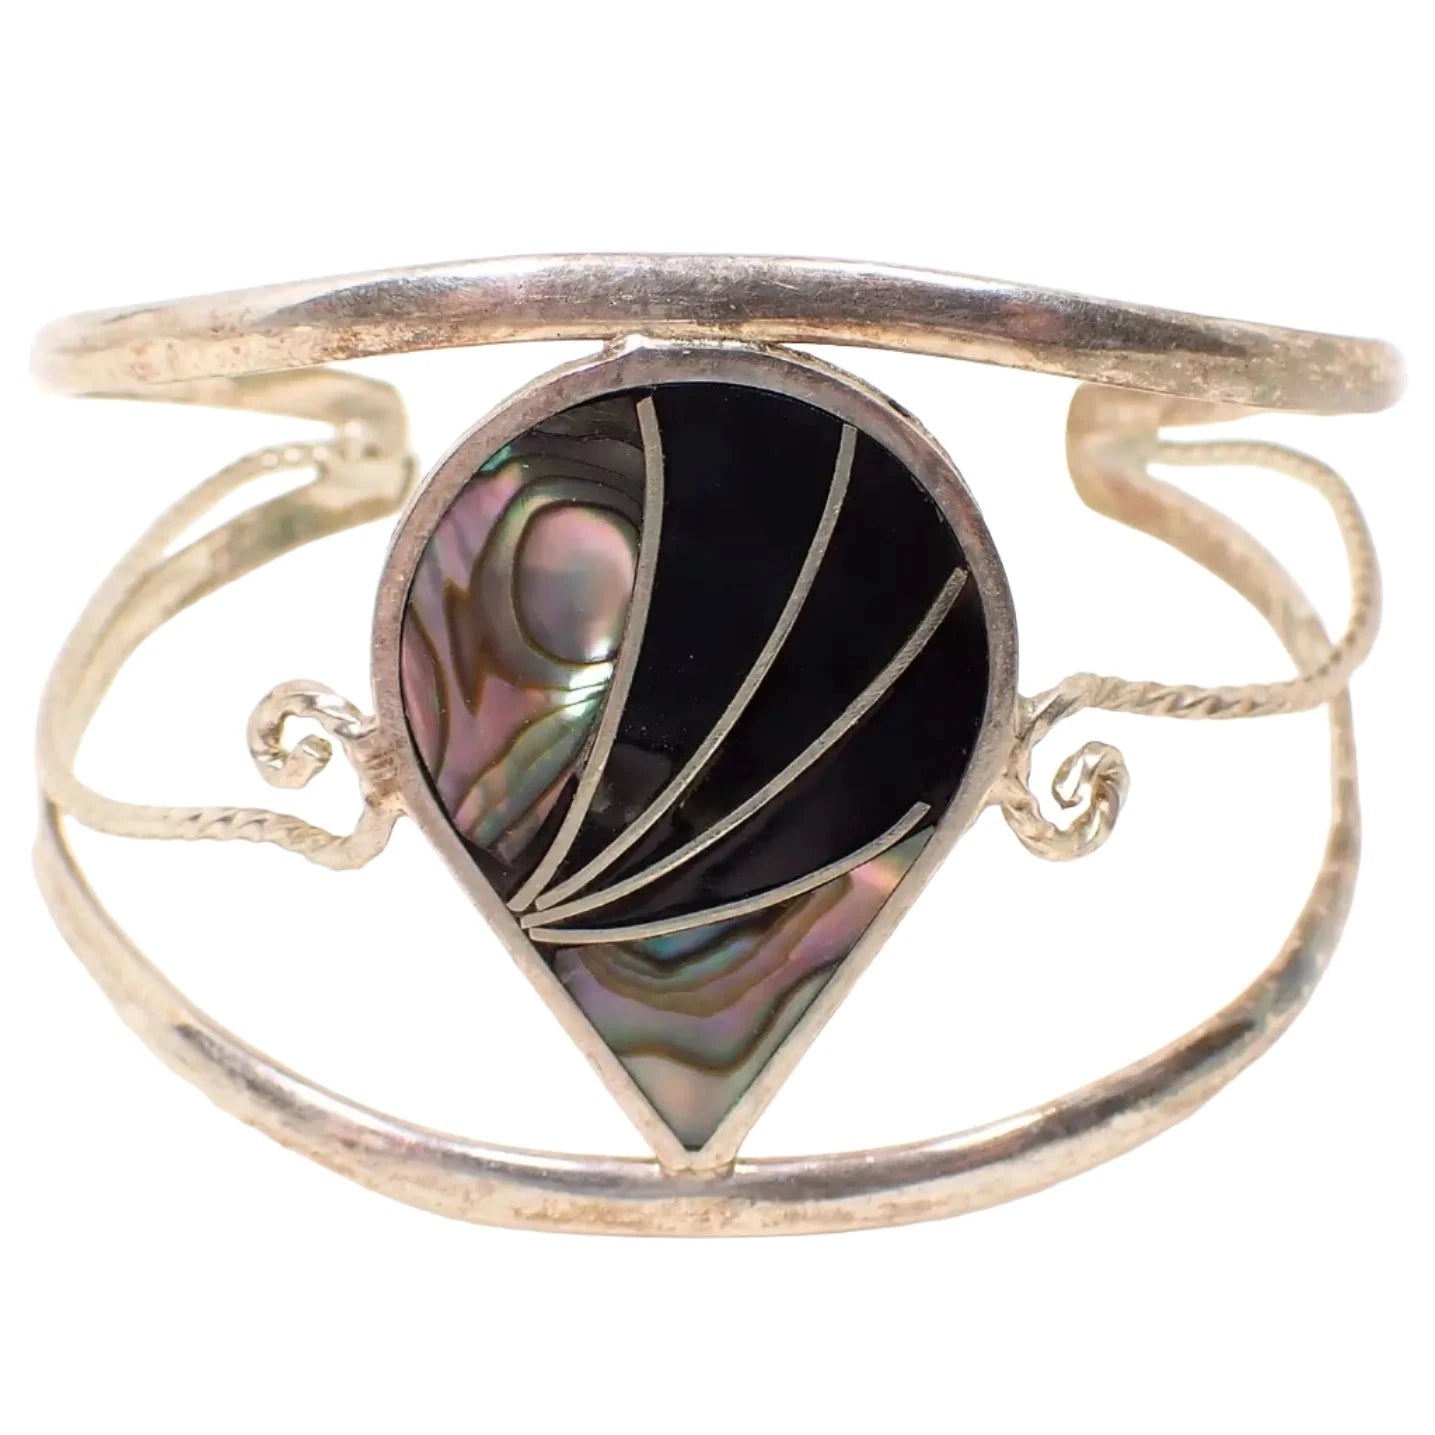 Enlarged front view of the Alpaca Mexican bracelet. The metal is silver tone in color. There are three rounded bands with open spaces between them making up the cuff part of the bracelet. The top and bottom are curved. The middle one has a twisted design with curls at the end. In the middle is a teardrop shape with inlaid abalone shell and black enamel with silver tone color metal curves between the areas.